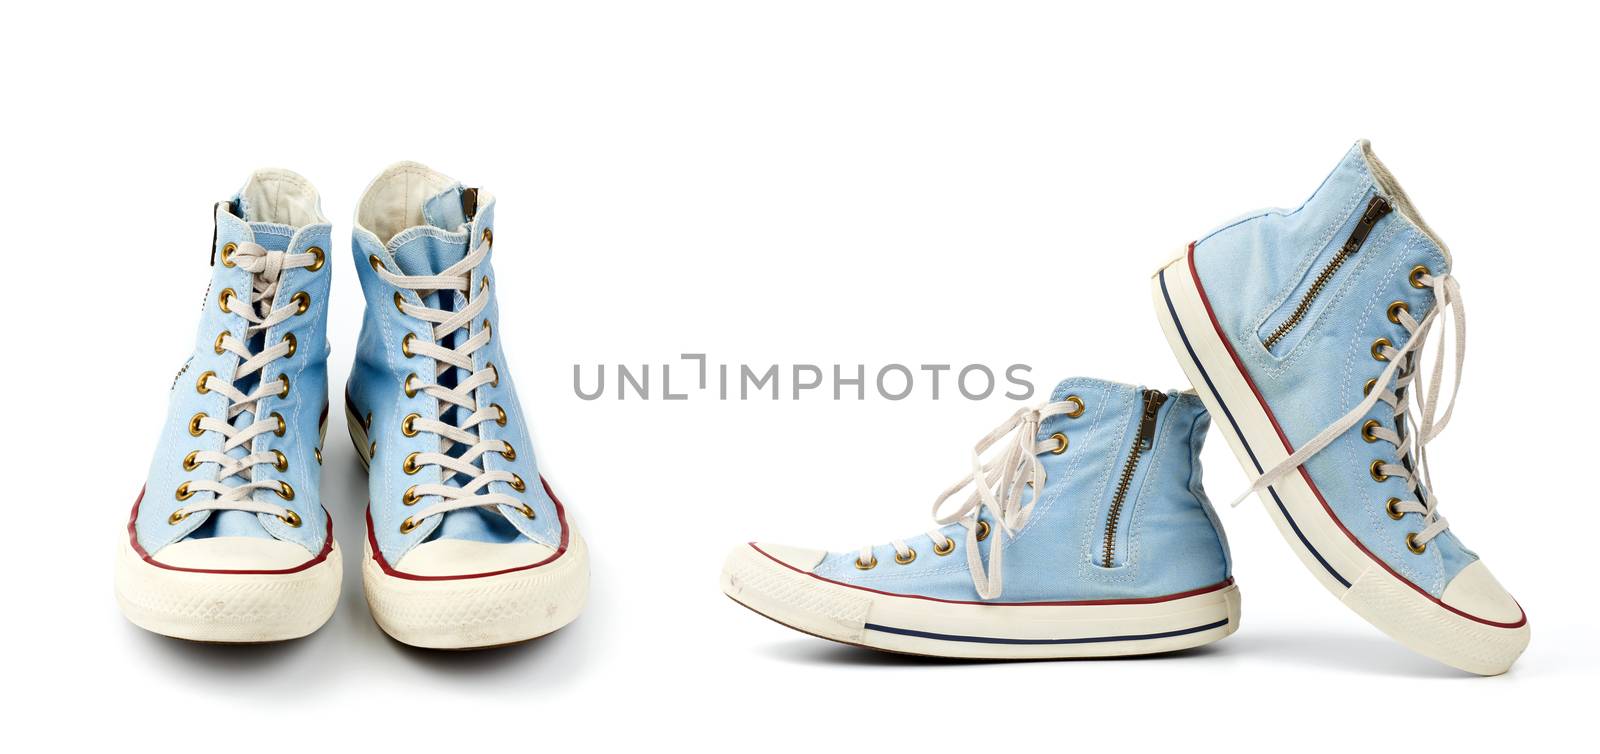 pair of light blue worn textile sneakers with laces and zippers  by ndanko